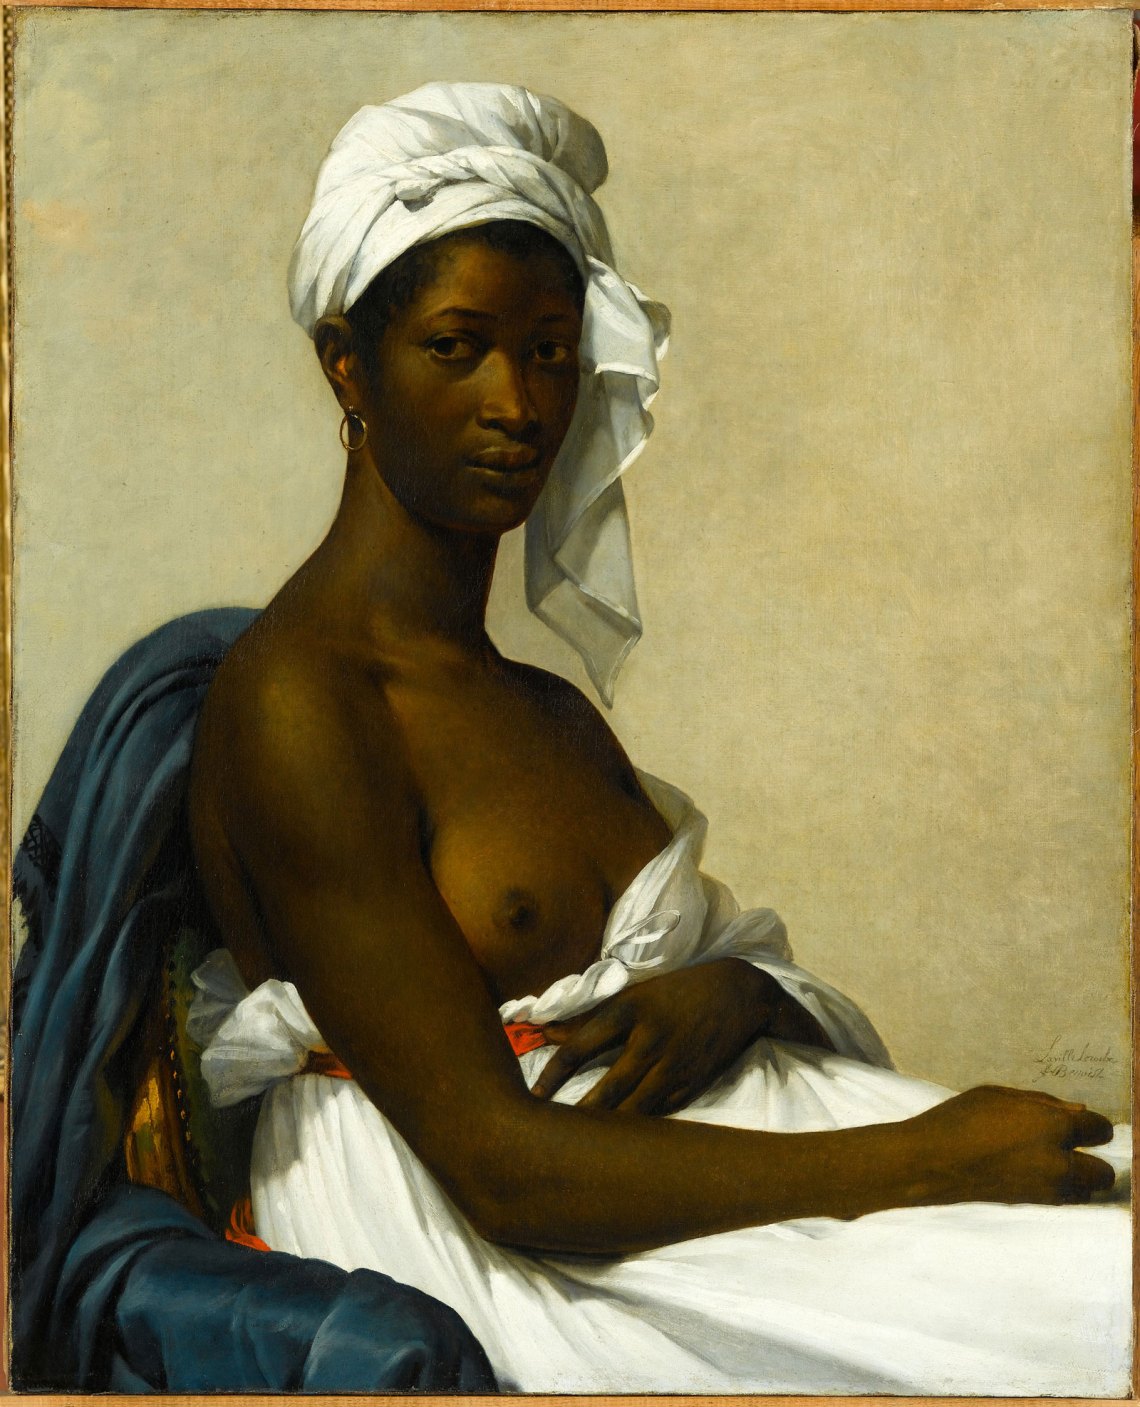 Reframing the Black Model at the Musée d’Orsay